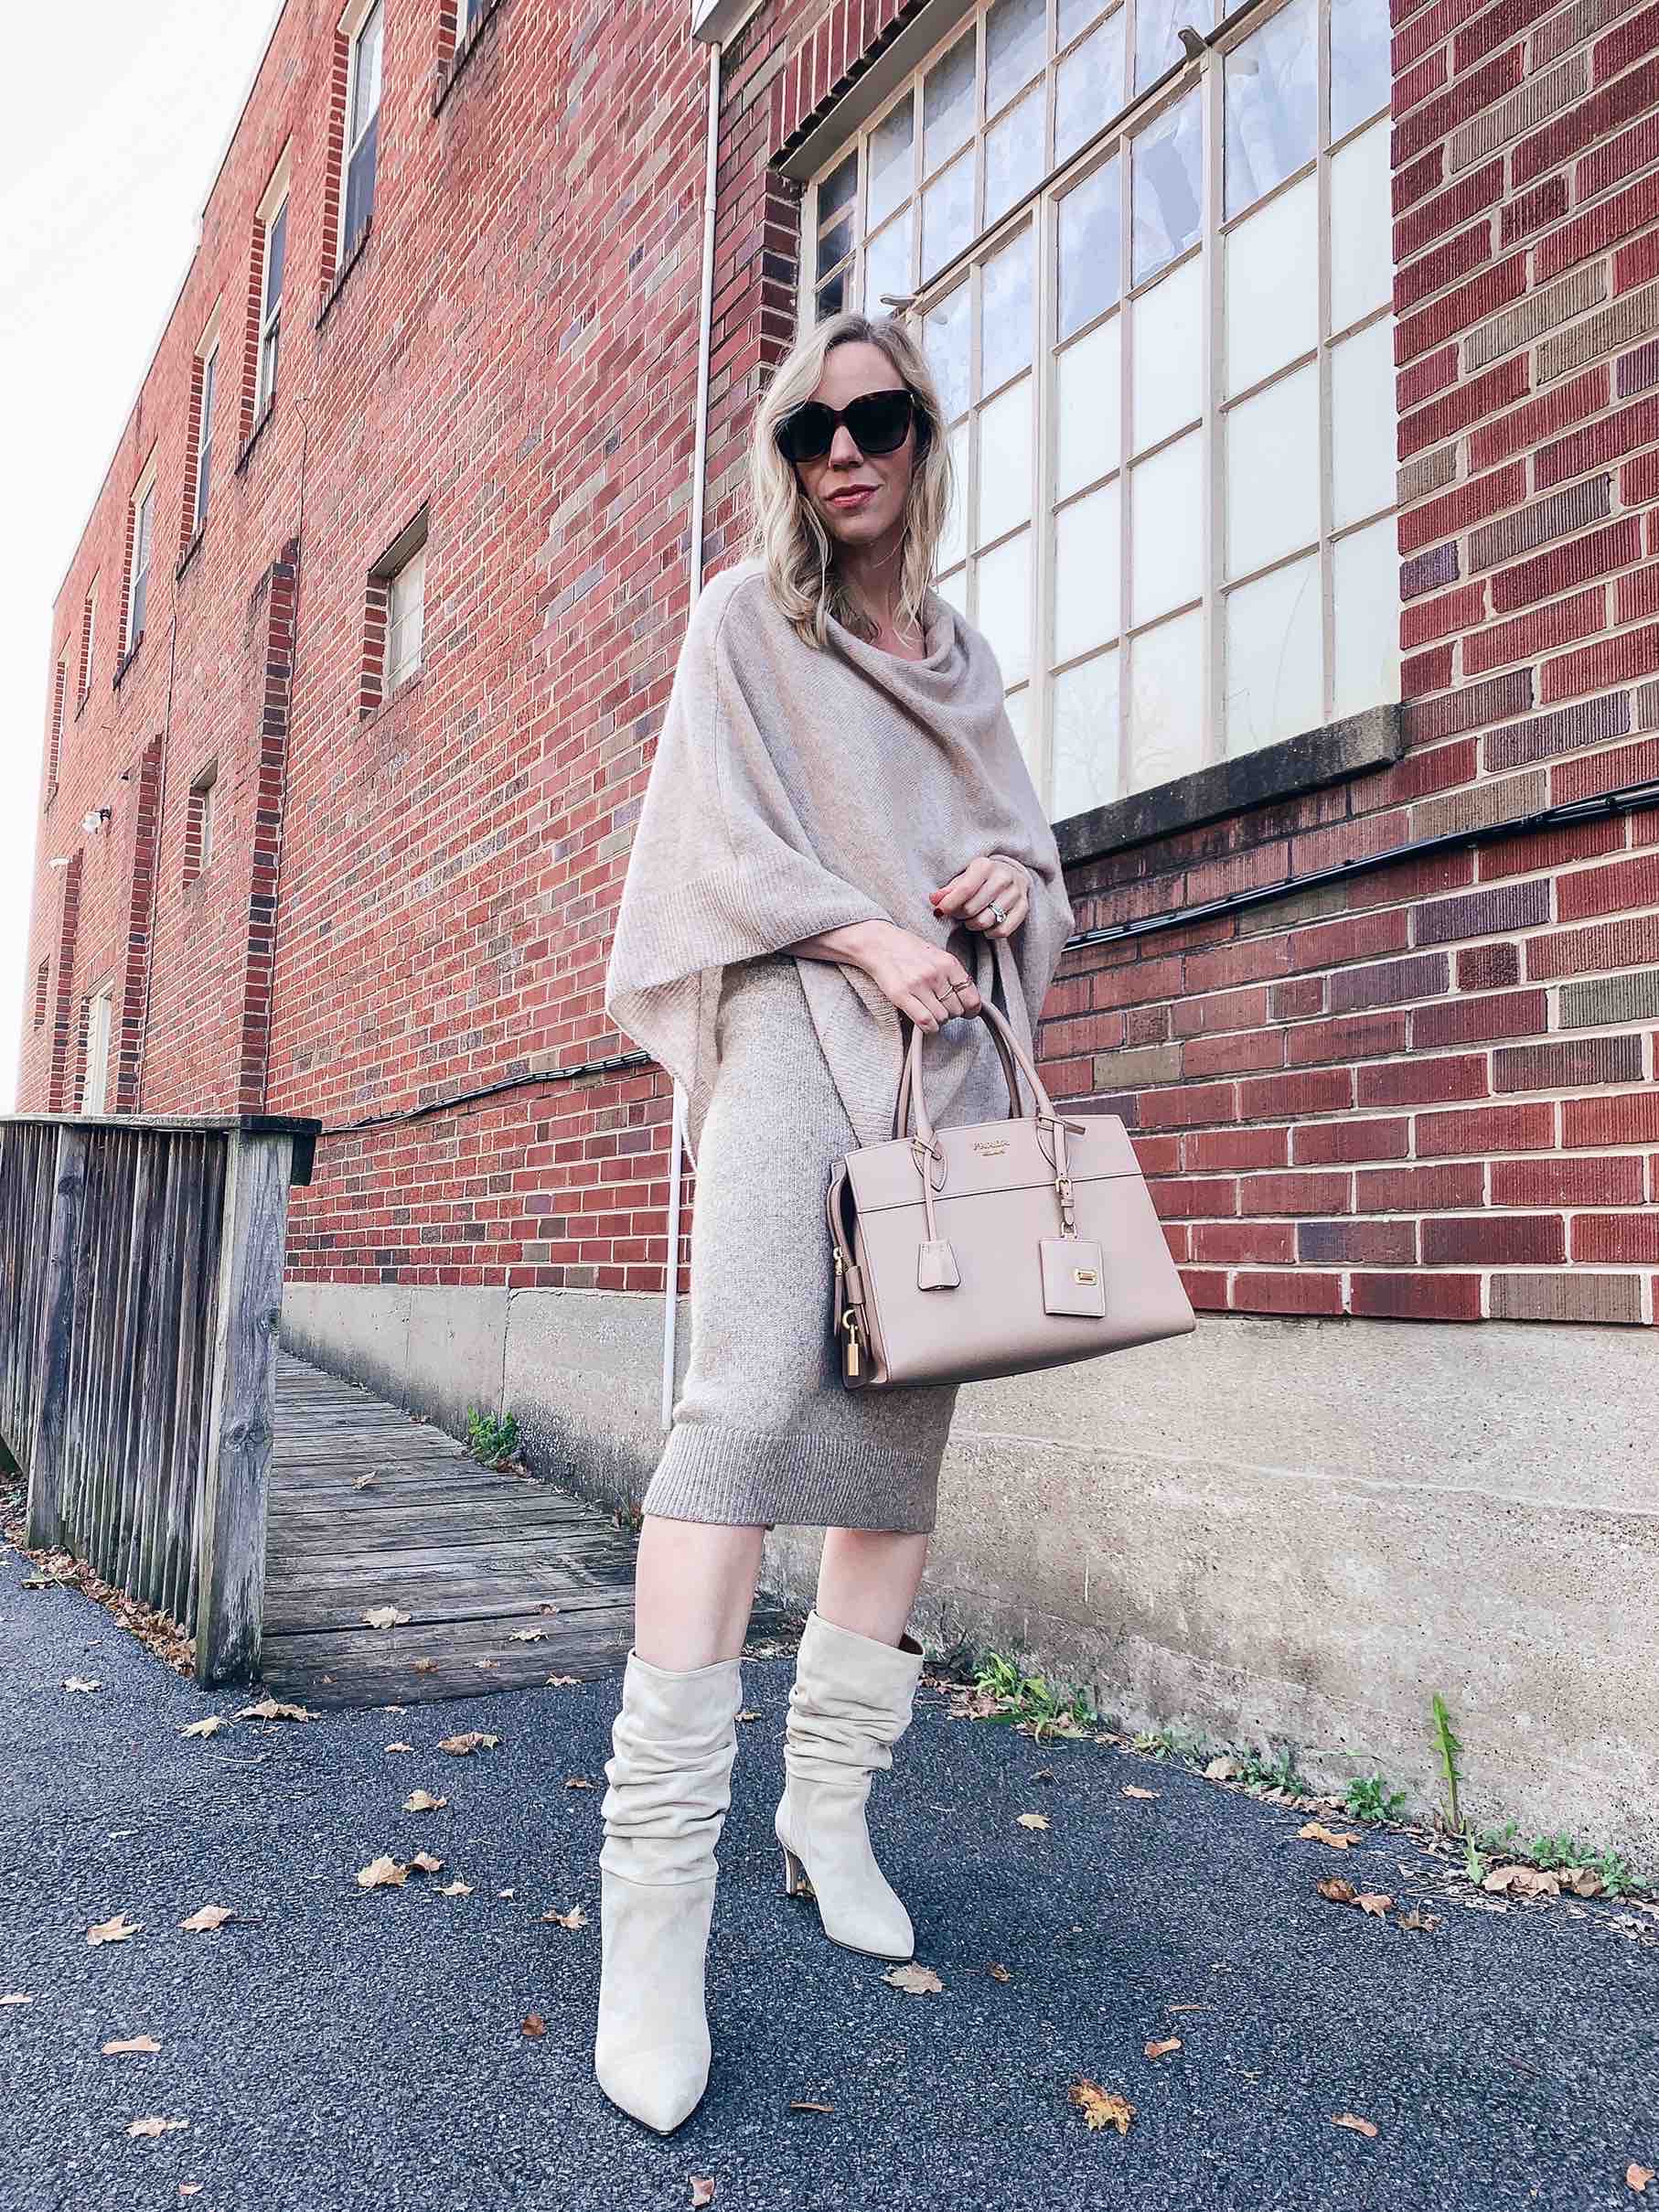 Meagan Brandon fashion blogger of Meagan's Moda wears camel poncho with  faux leather mini skirt, croc leather knee high boots and Louis Vuitton Dauphine  MM - Meagan's Moda